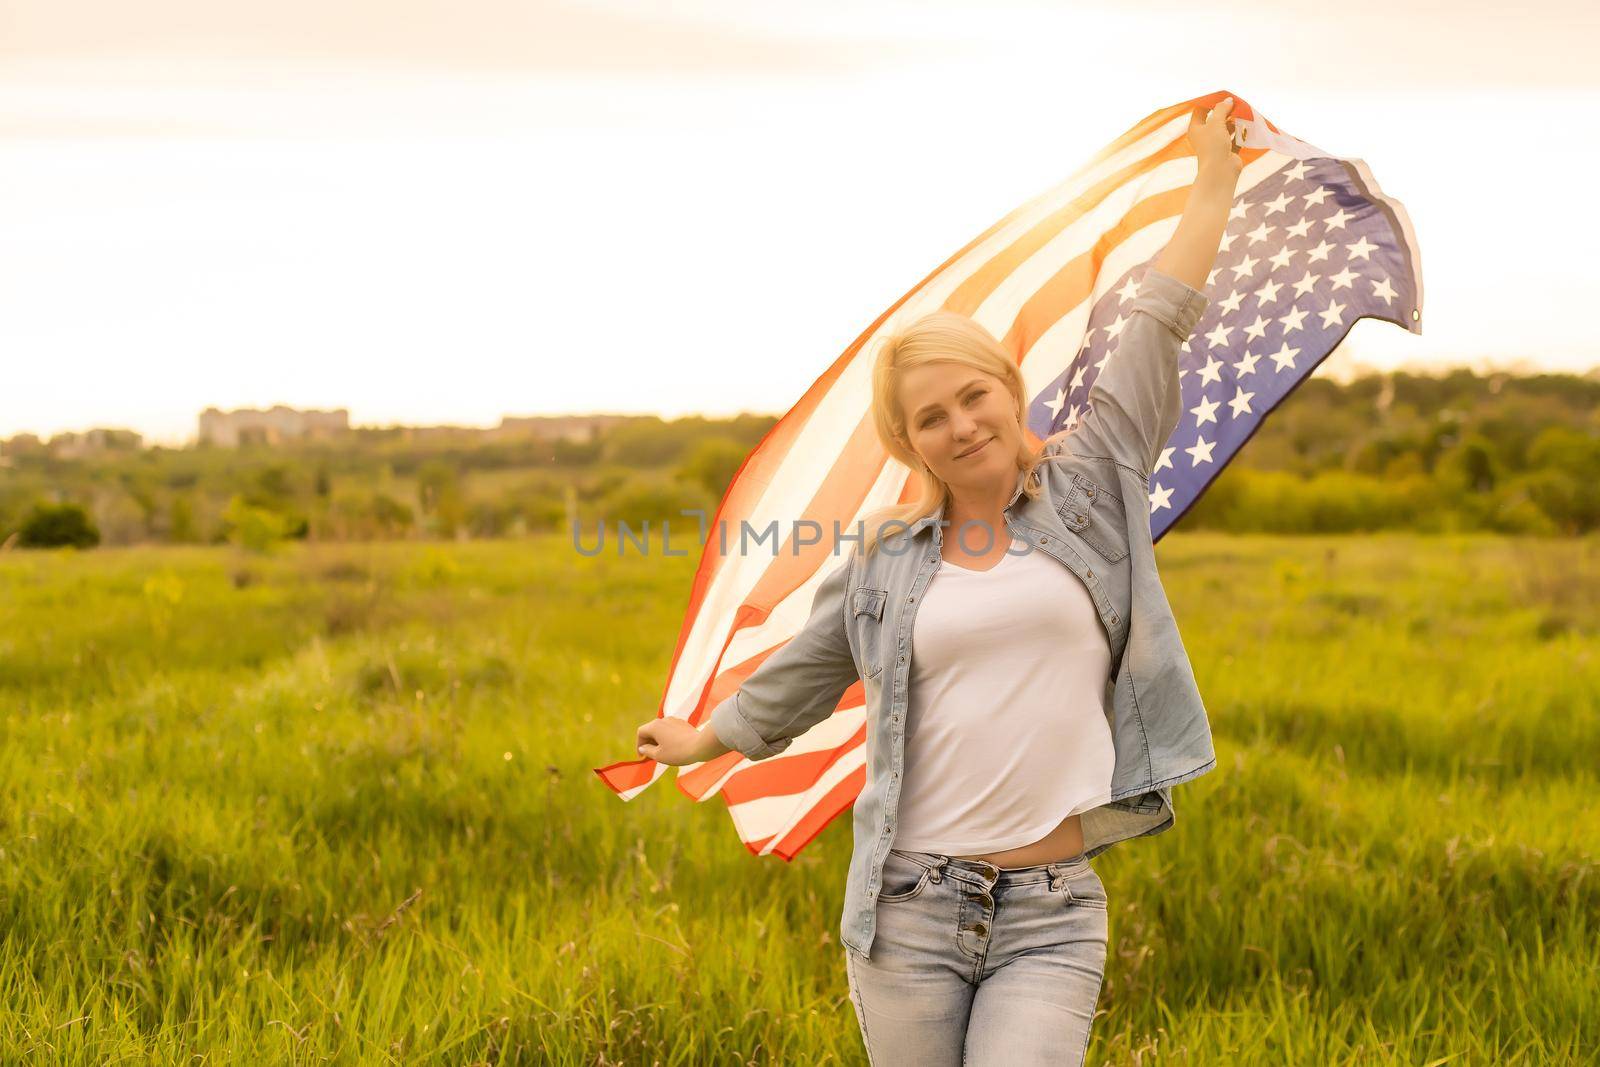 attractive woman holding an American flag in the wind in a field. Summer landscape against the blue sky. Horizontal orientation. by Andelov13